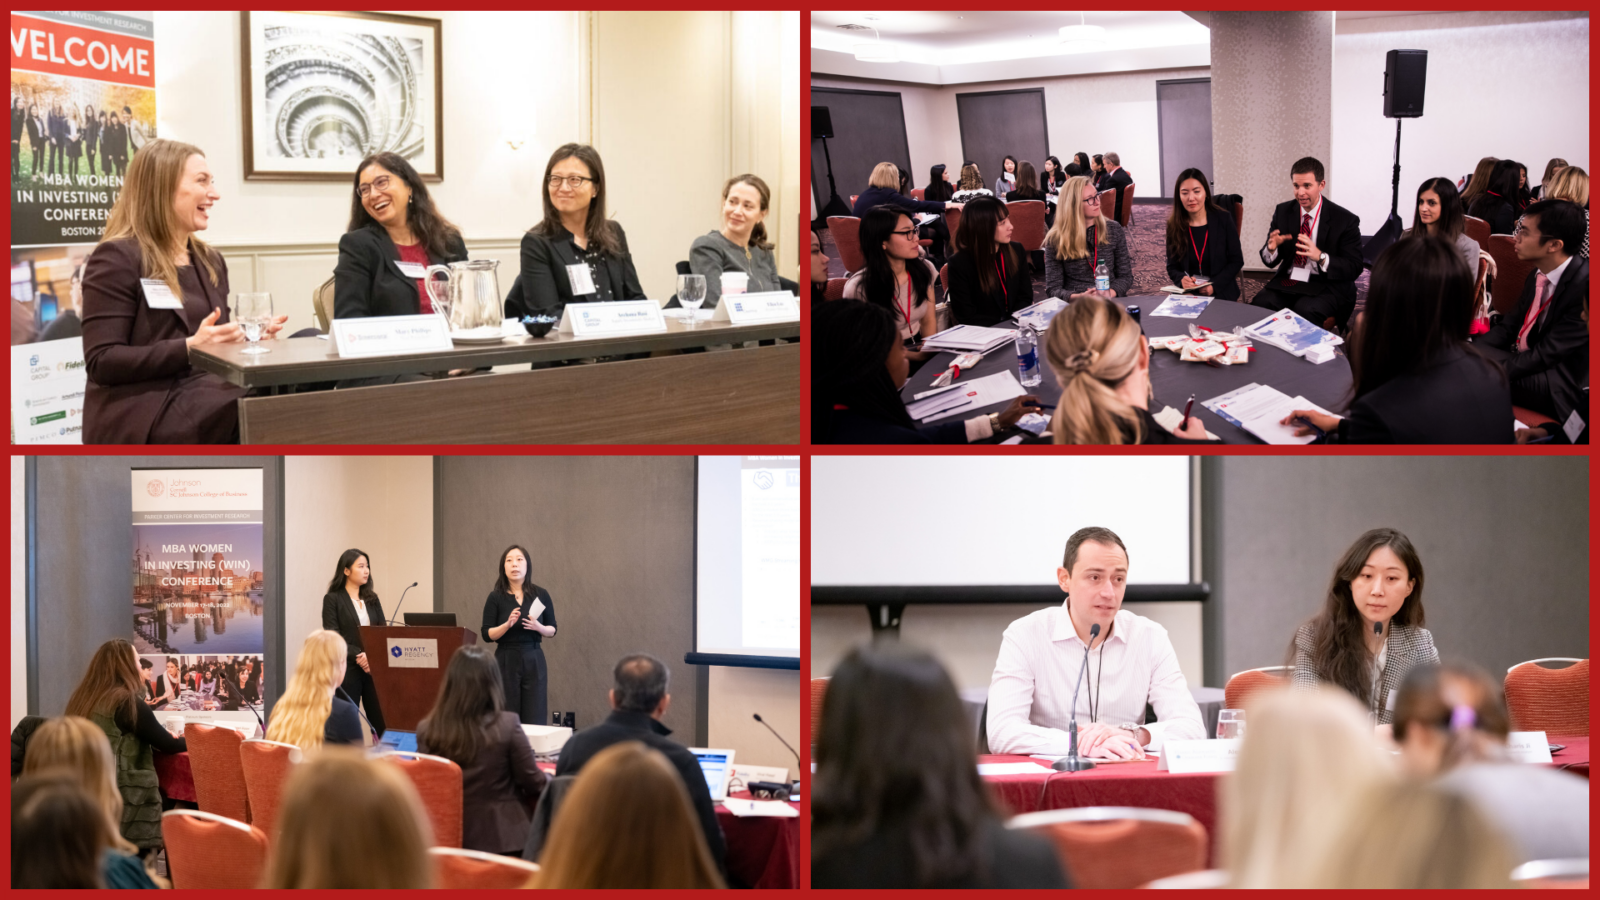 Collage of MBA students at 2022 MBA Women in Investing Conference